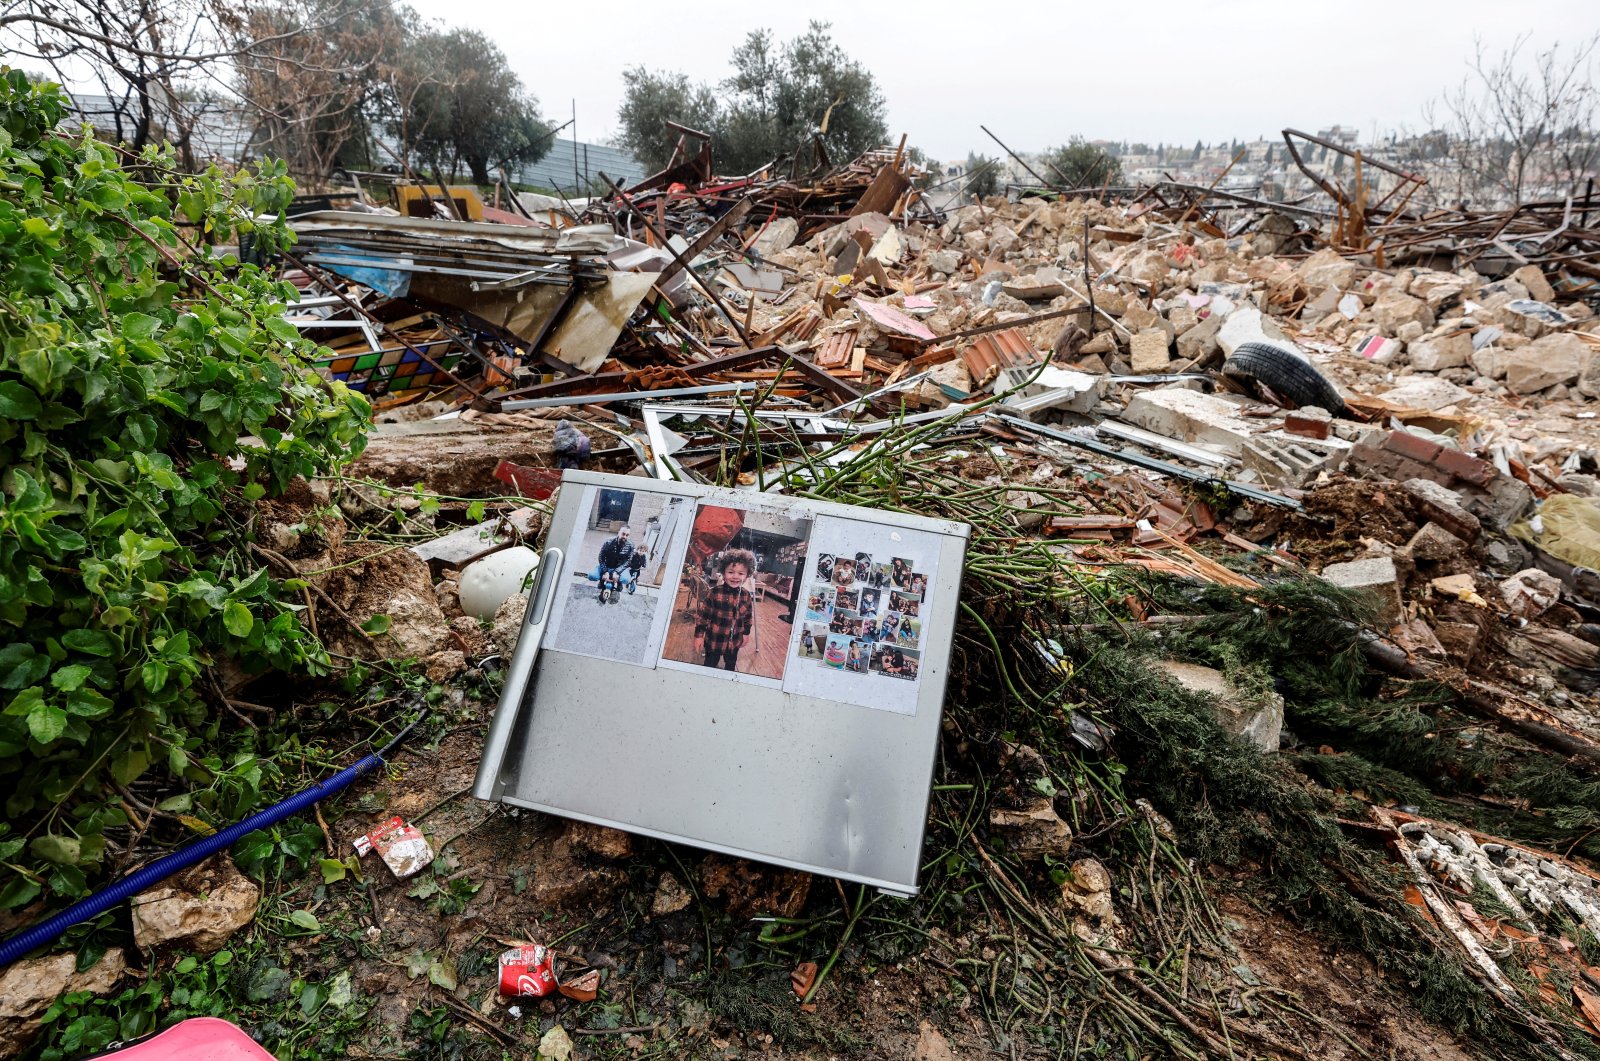 Family photos are seen on the remains of a refrigerator at the site of a demolished house in the Sheikh Jarrah neighborhood of East Jerusalem, occupied Palestine, Jan. 19, 2022. (Reuters Photo)